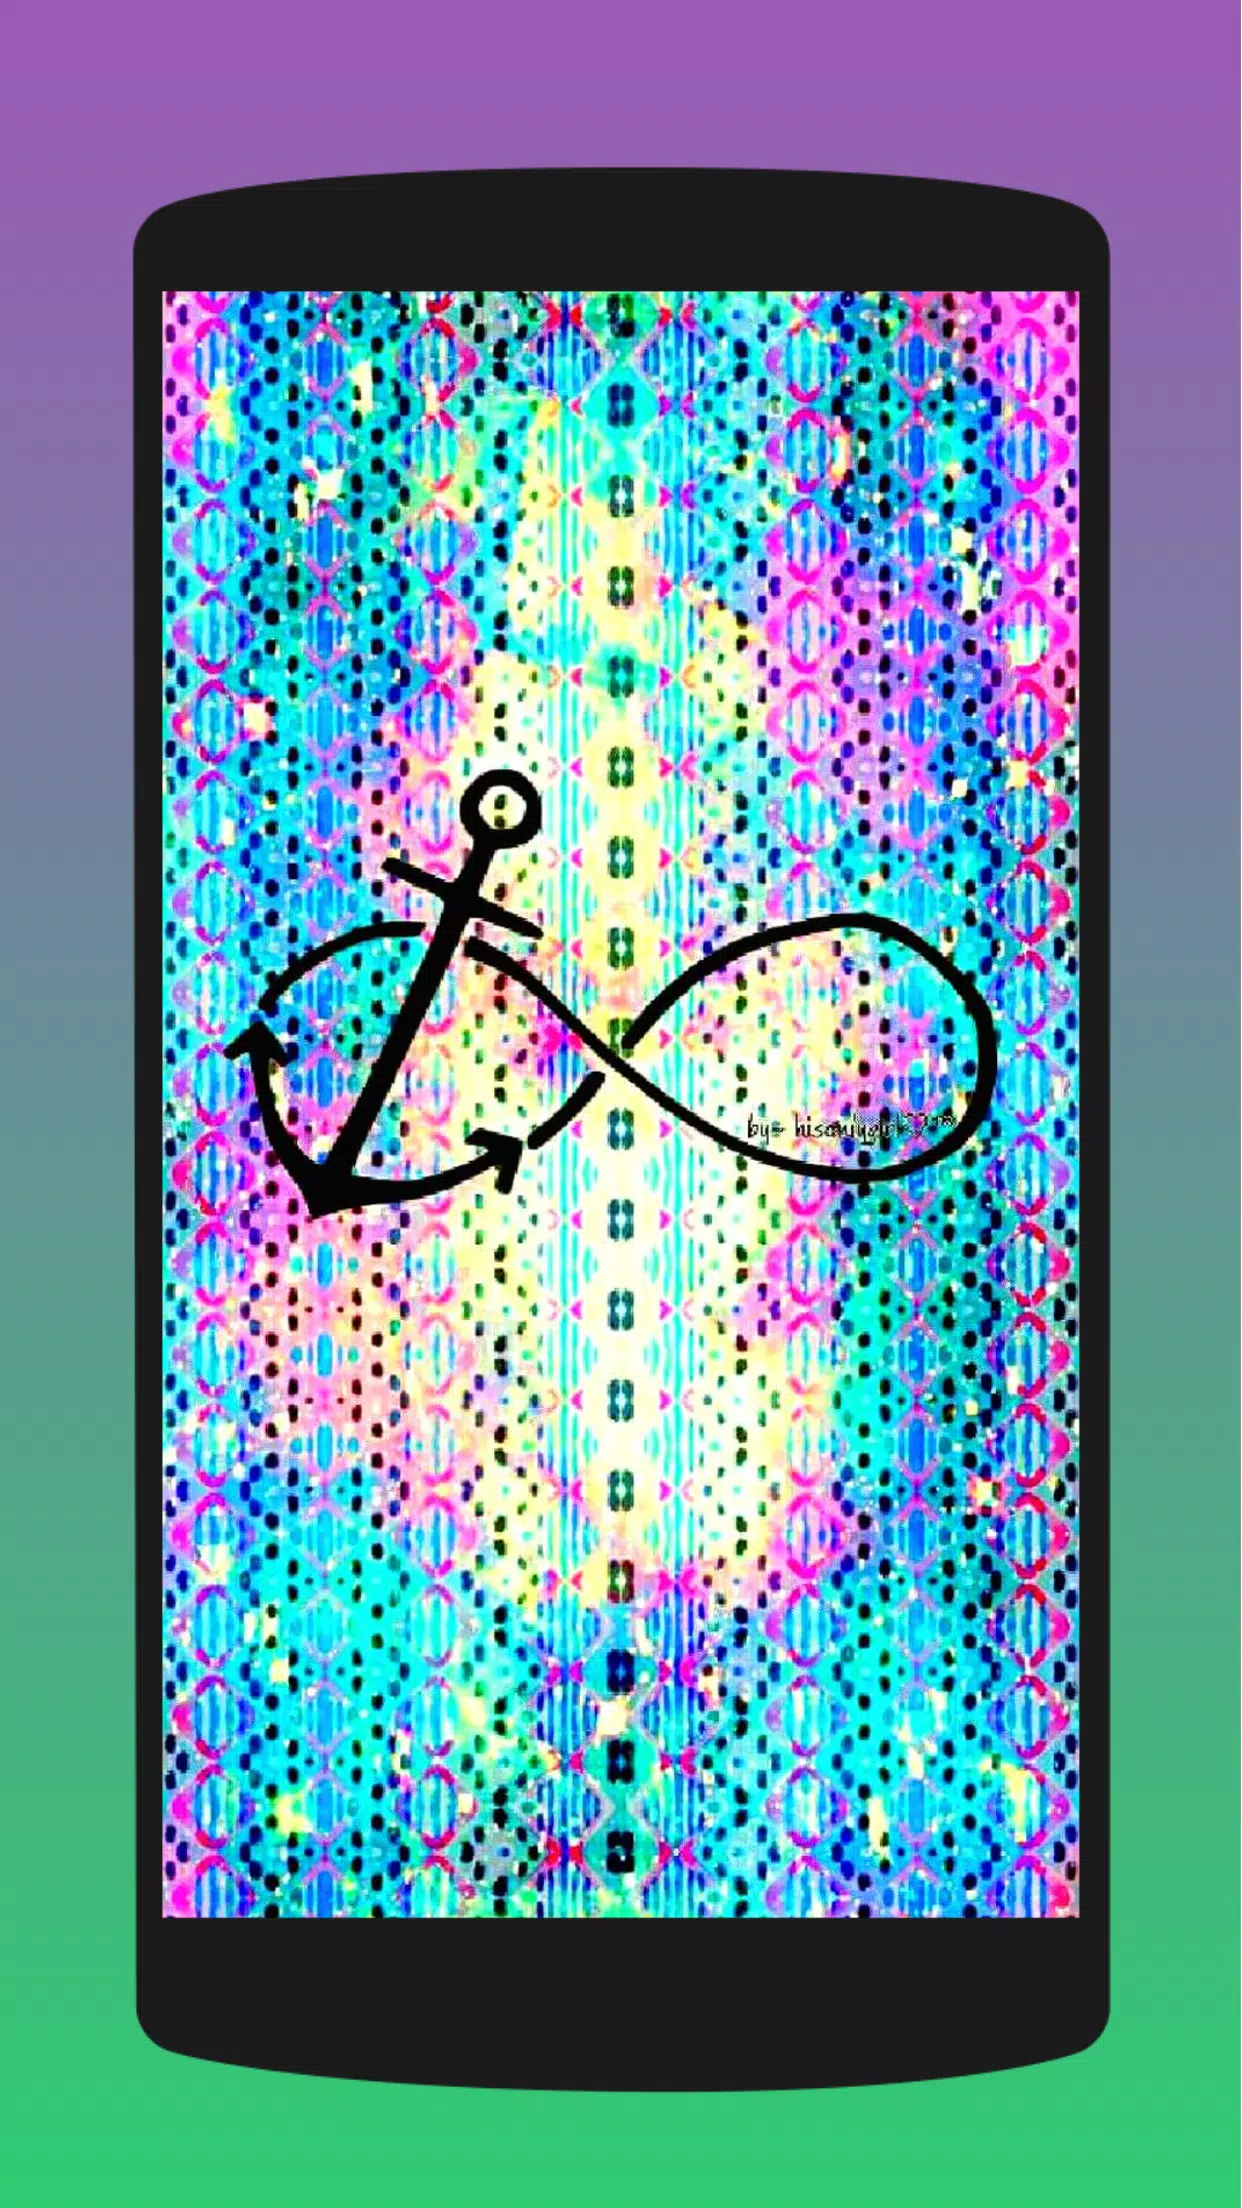 infinity sign with anchor wallpaper